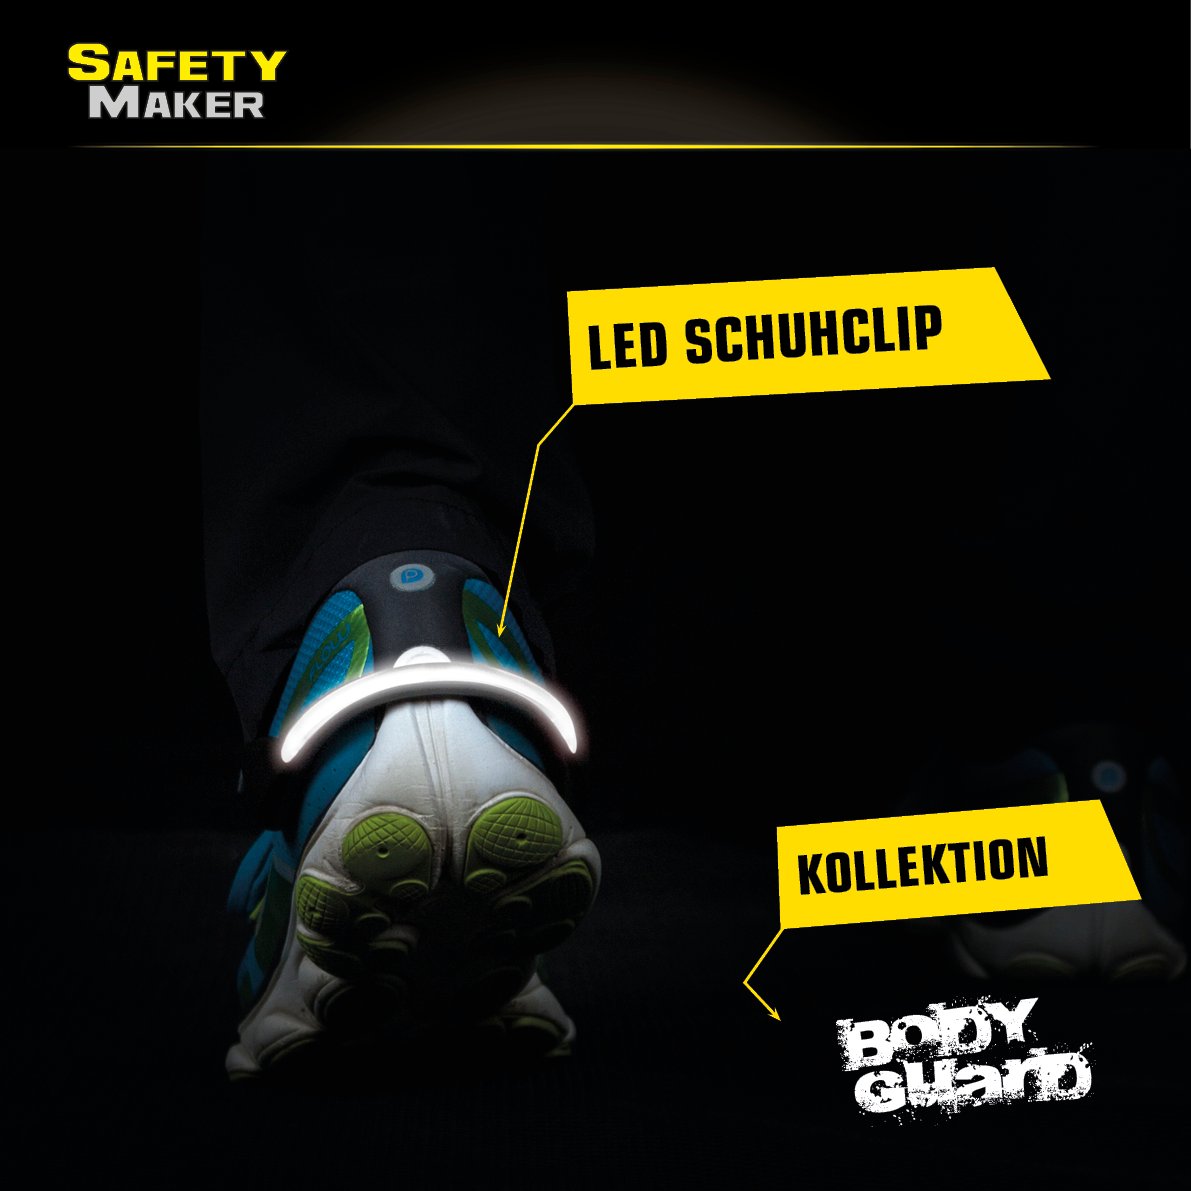 LED Schuh Clip, LED-Blinklicht weiss